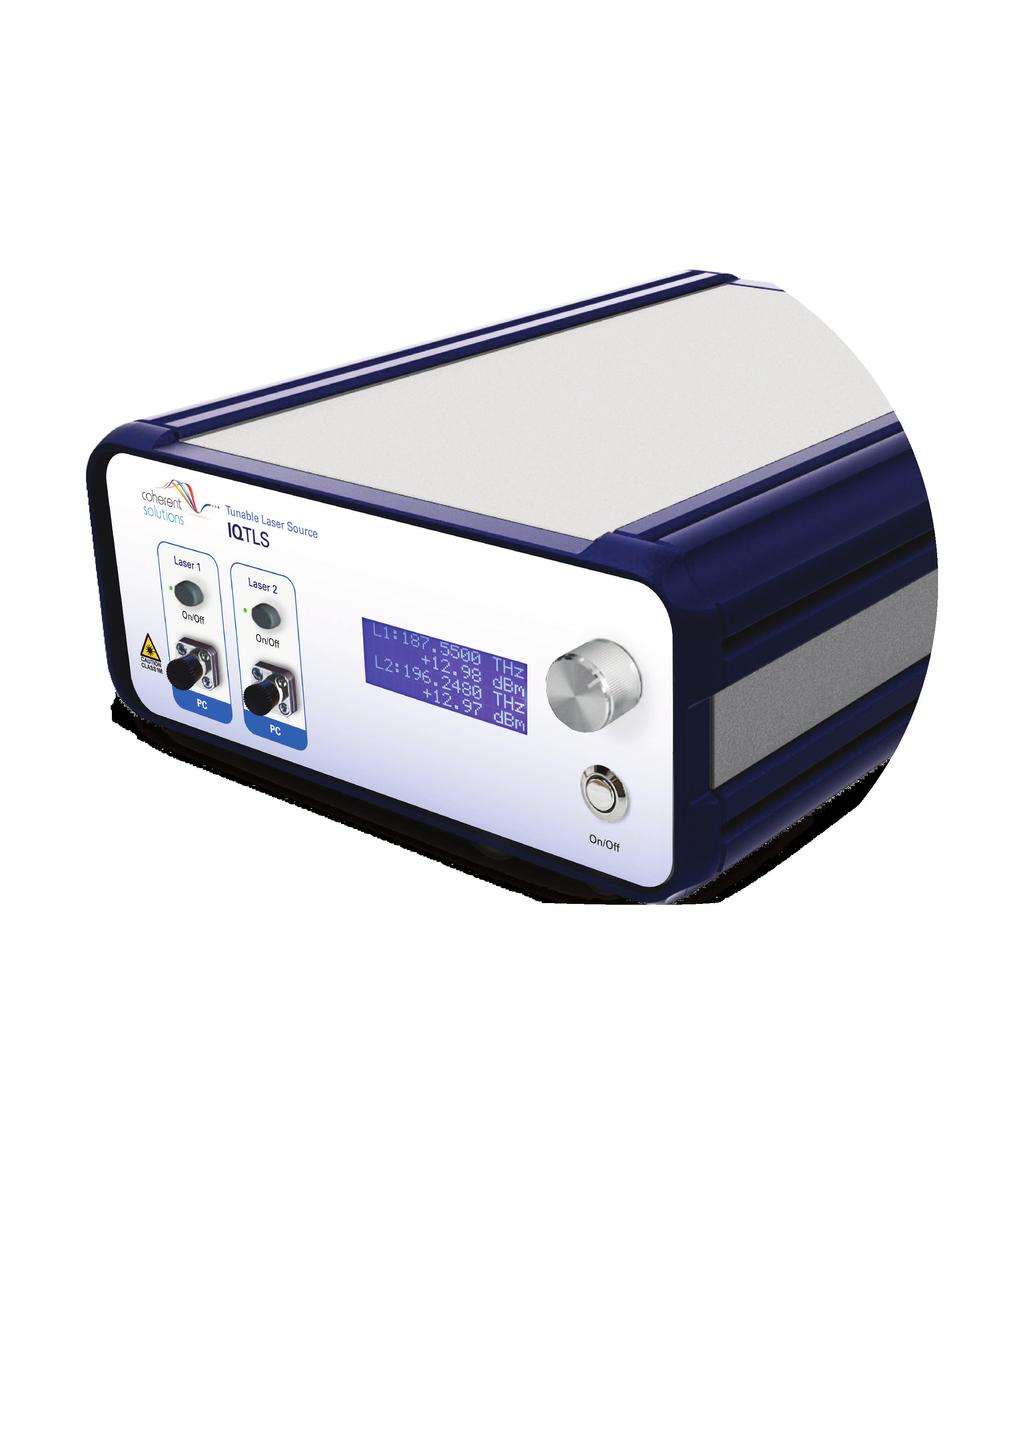 NOW WITH BROADER TUNING RANGE Smarter Benchtop Tunable Laser Source Benchtop